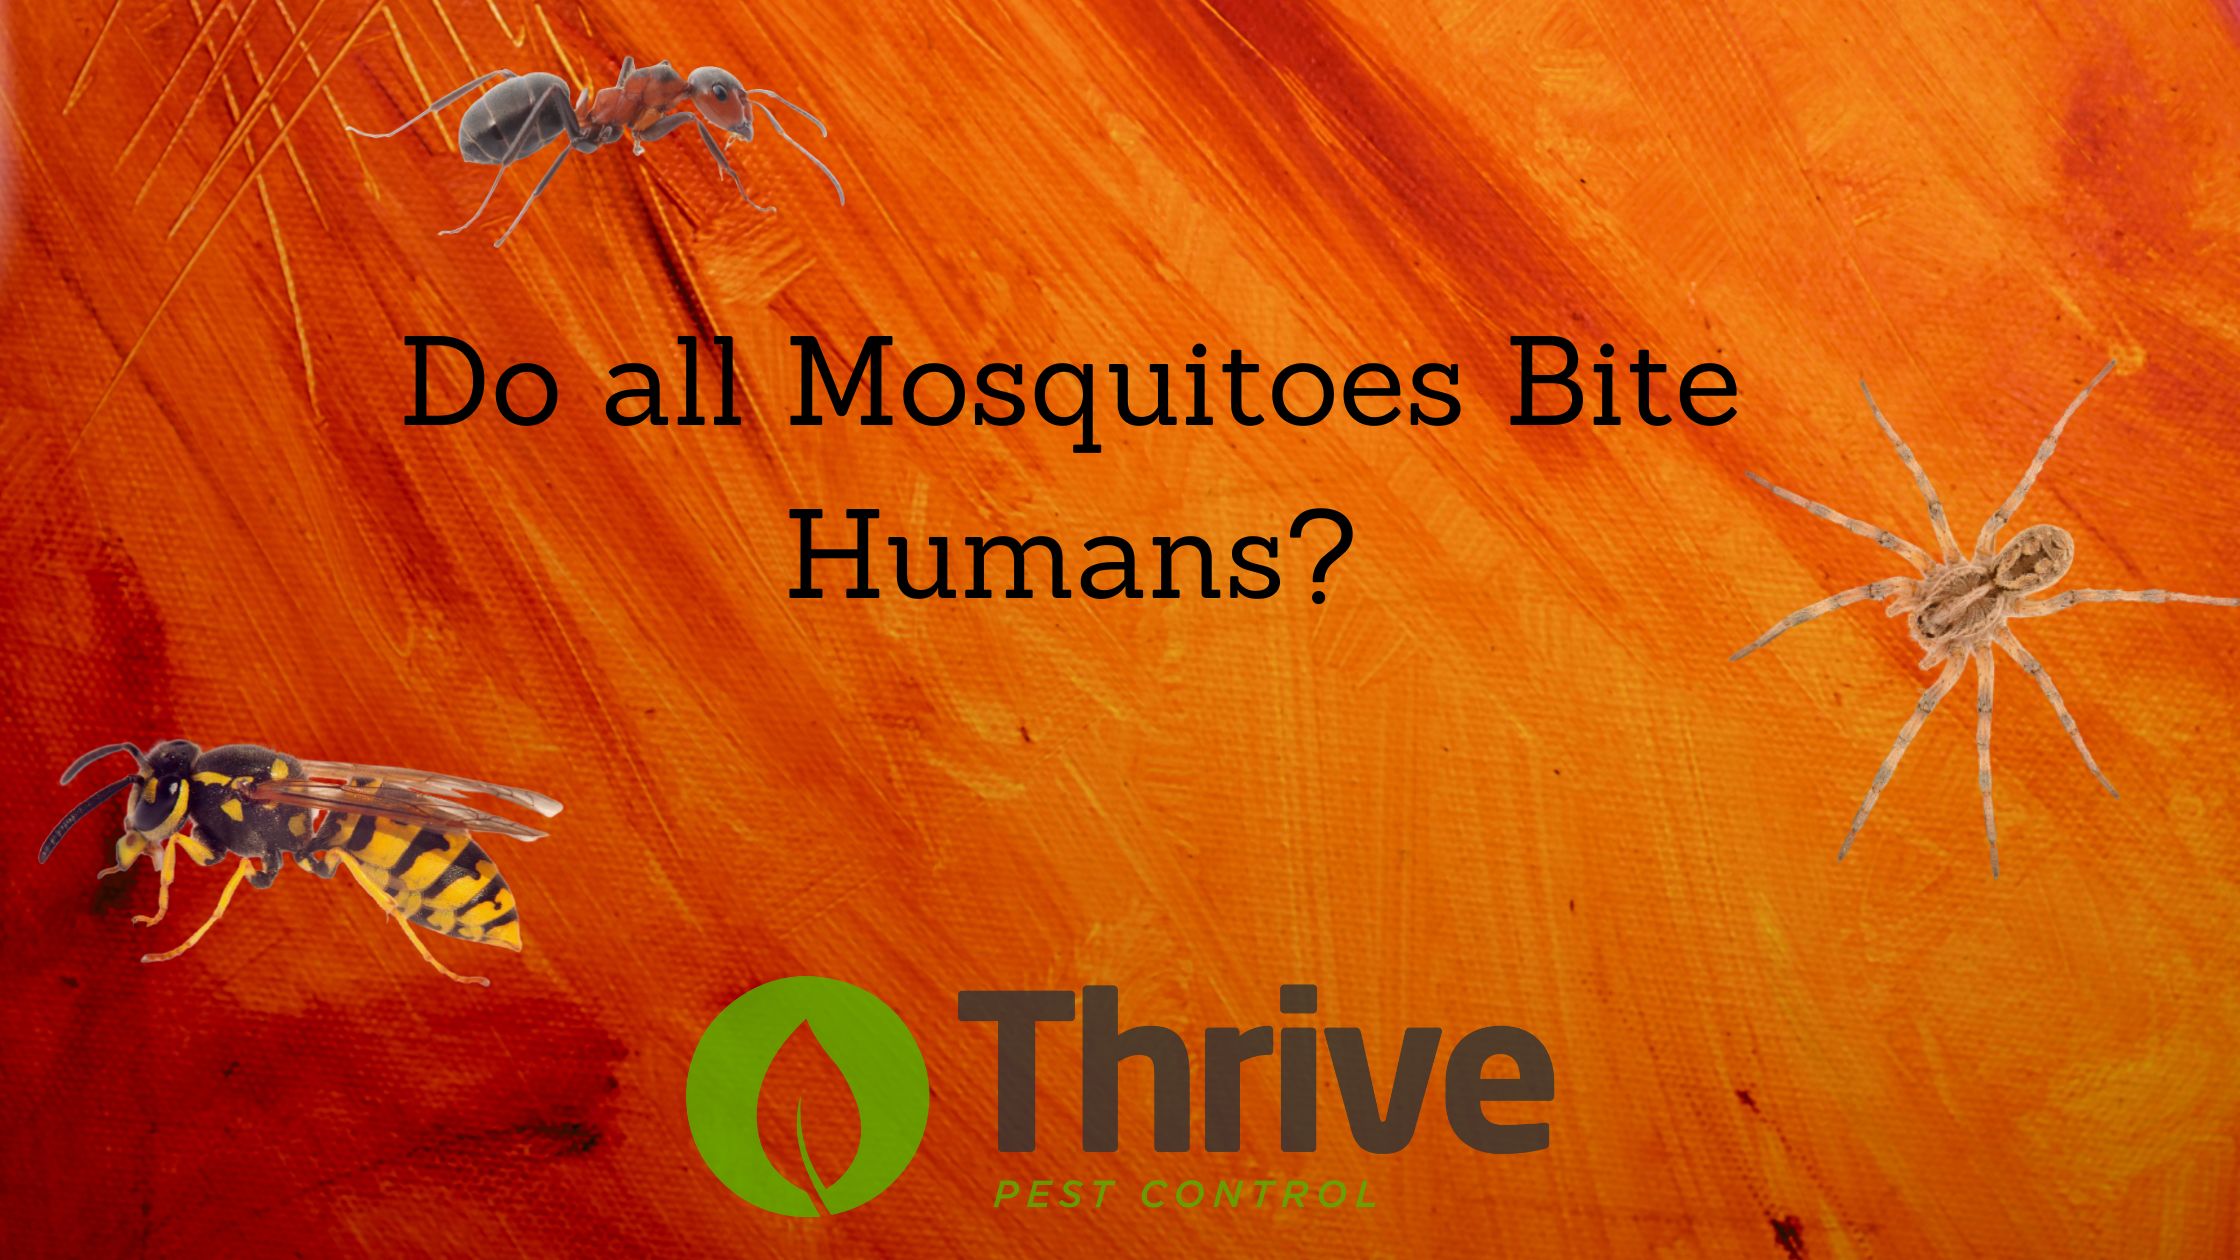 Do all Mosquitoes Bite Humans